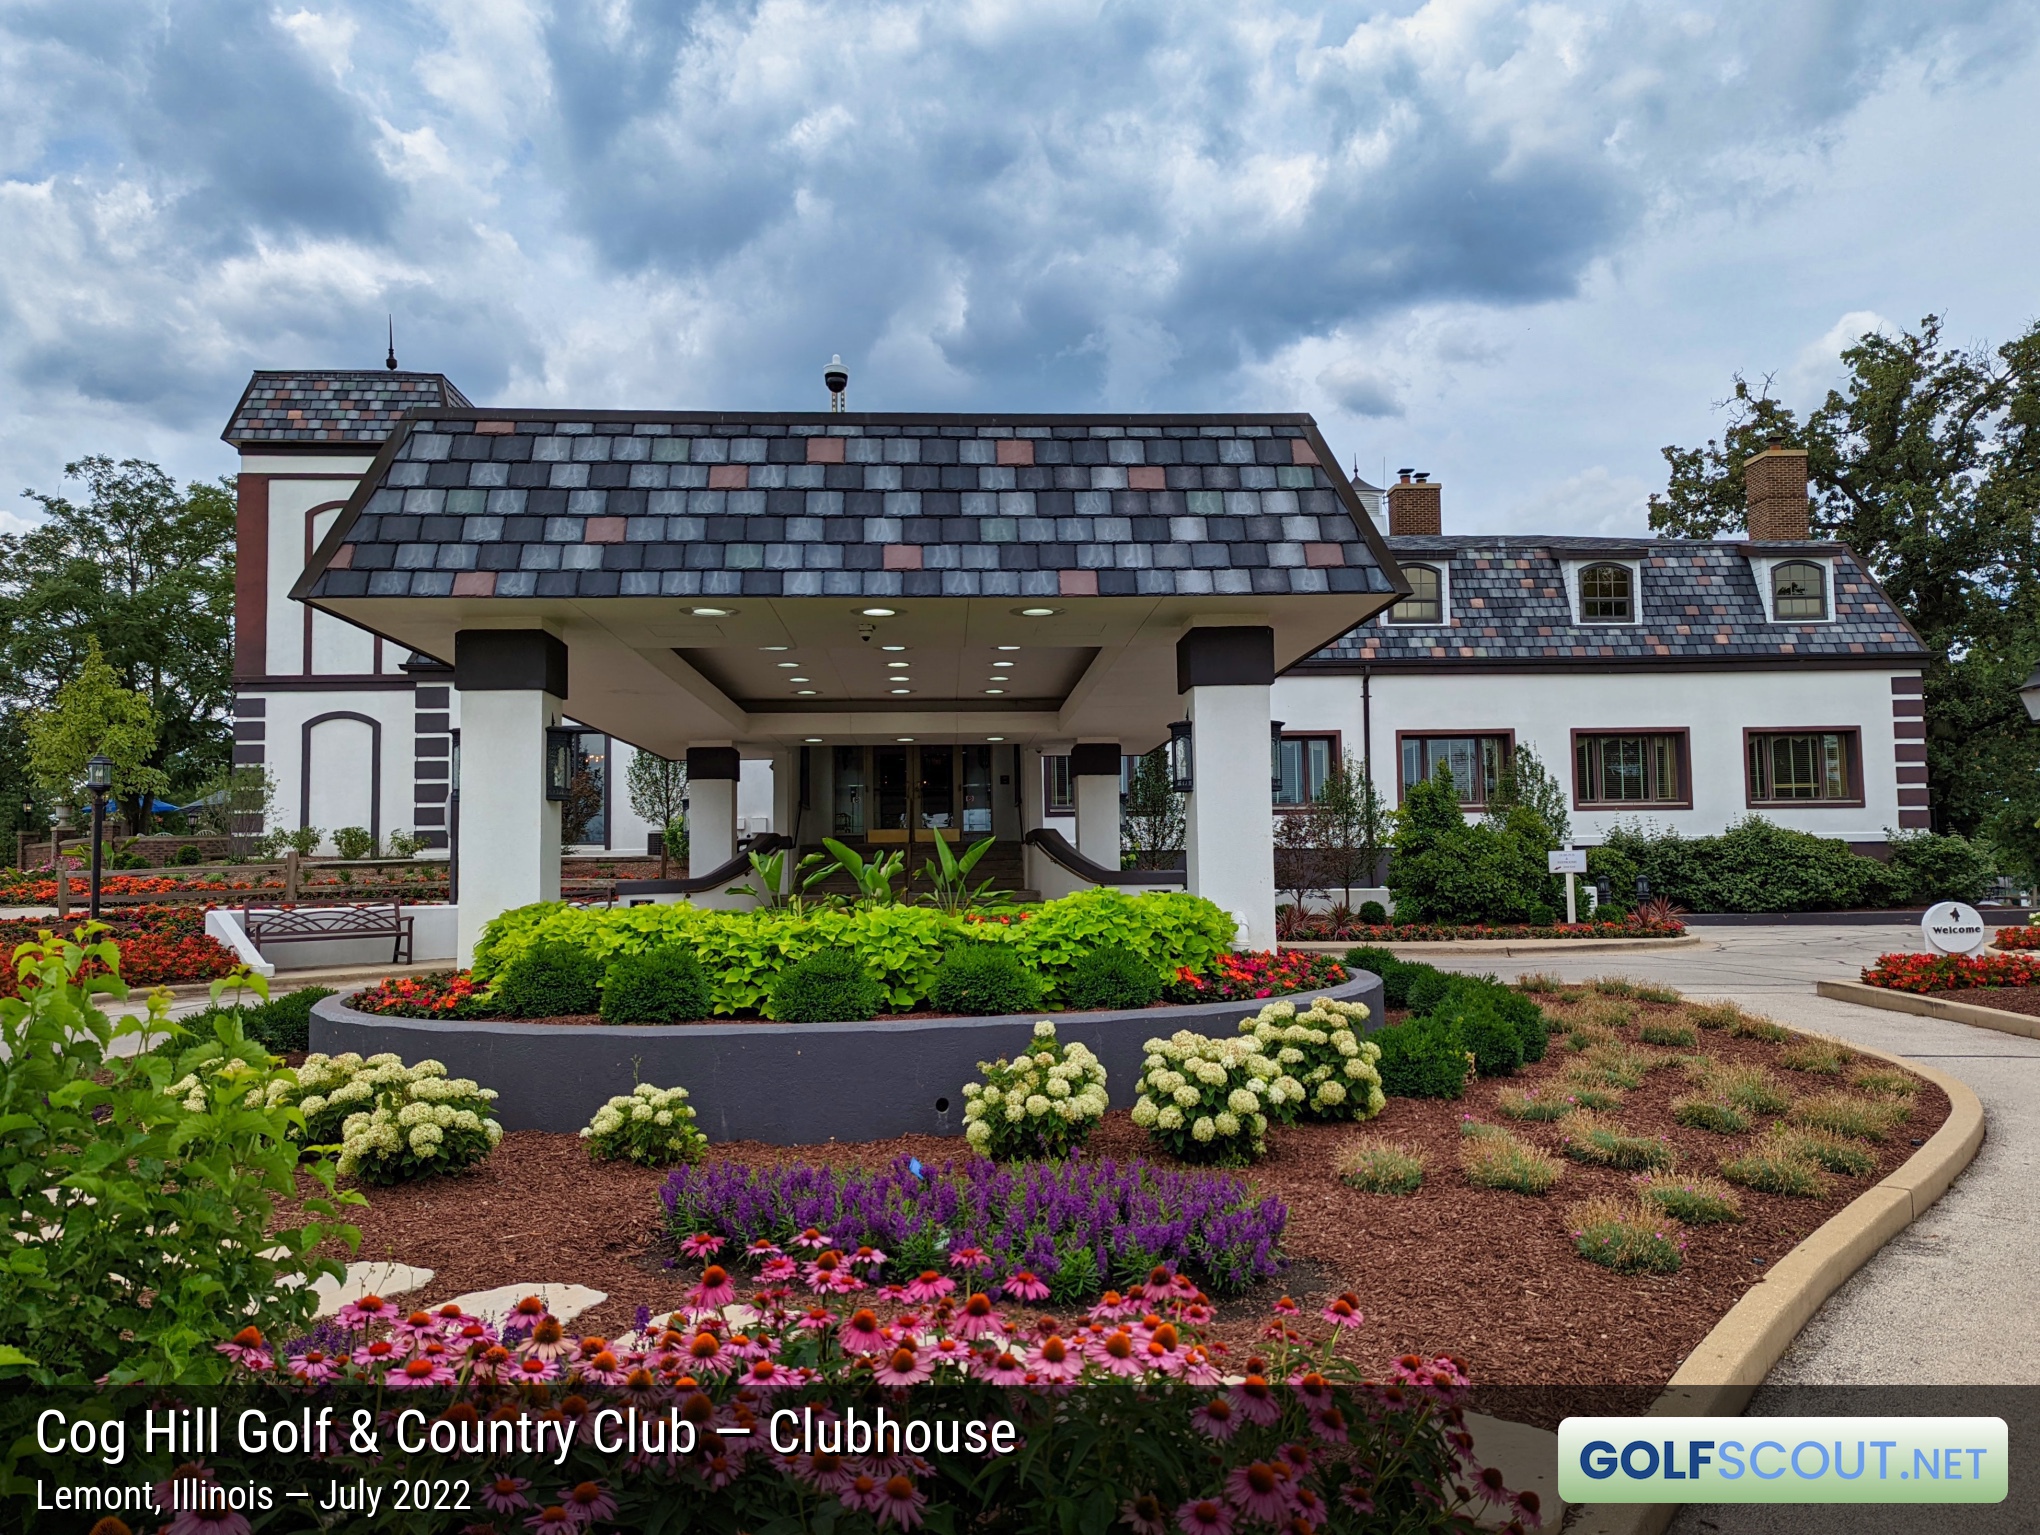 Photo of the clubhouse at Cog Hill Course #1 in Lemont, Illinois. The main clubhouse building at Cog Hill, which has the banquet hall and nice restaurant.